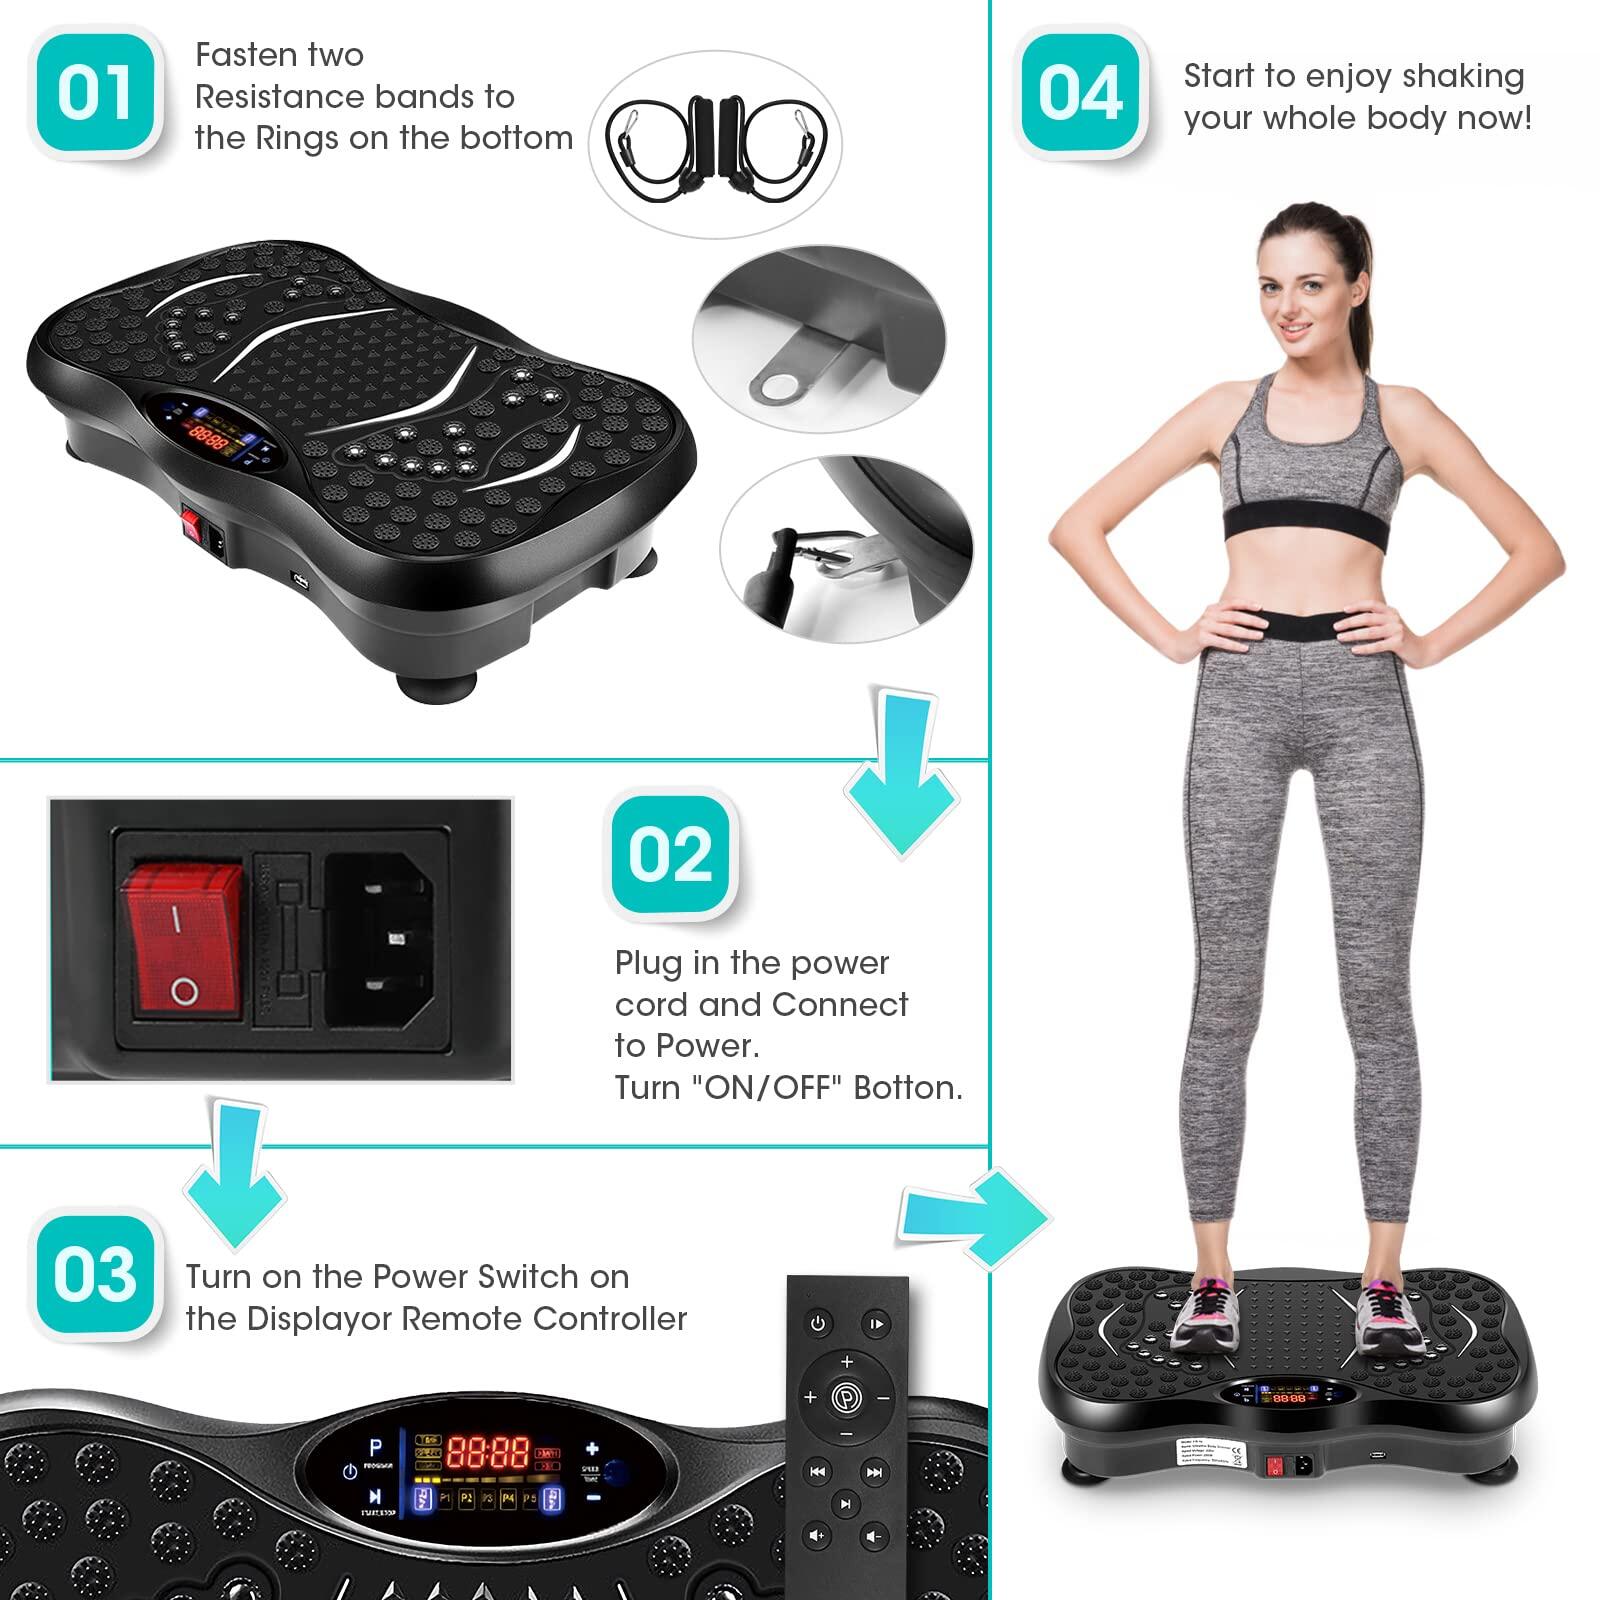 Vibration Plates, Vibration Fitness Exercise Machine for Home Use, with Bluetooth Speaker, 5 Program Modes, 2 Resistance Bands, Vibration Fitness Trainer, 330lb Max Load